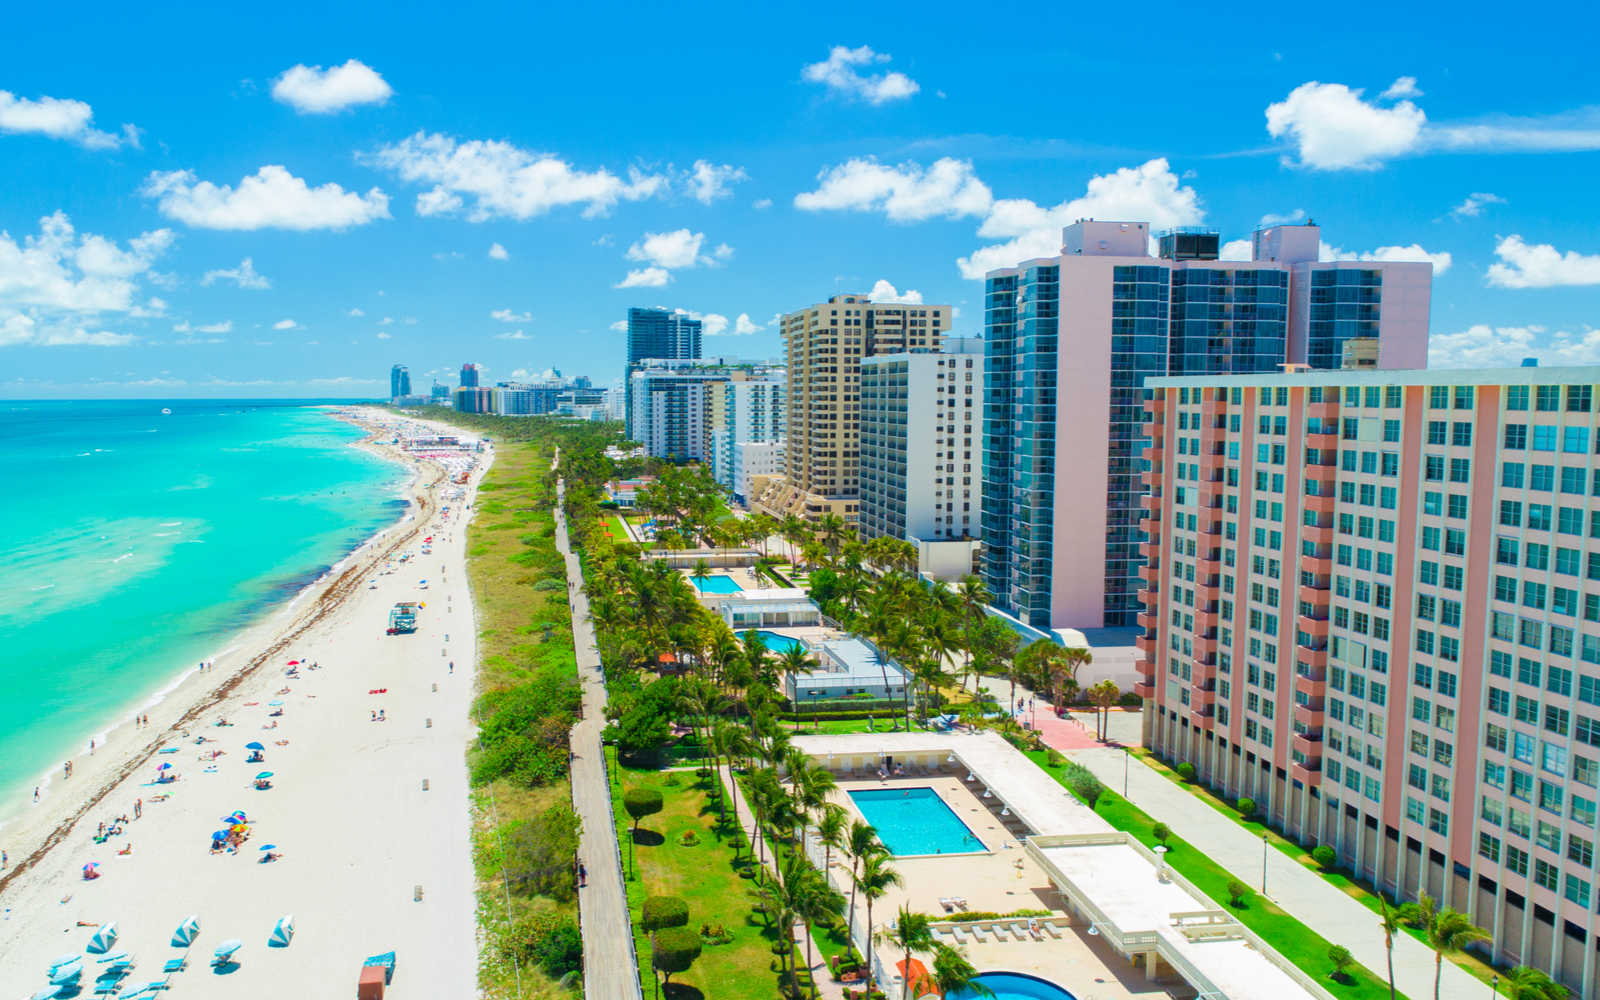 21 Best Things to Do in Miami in 2022